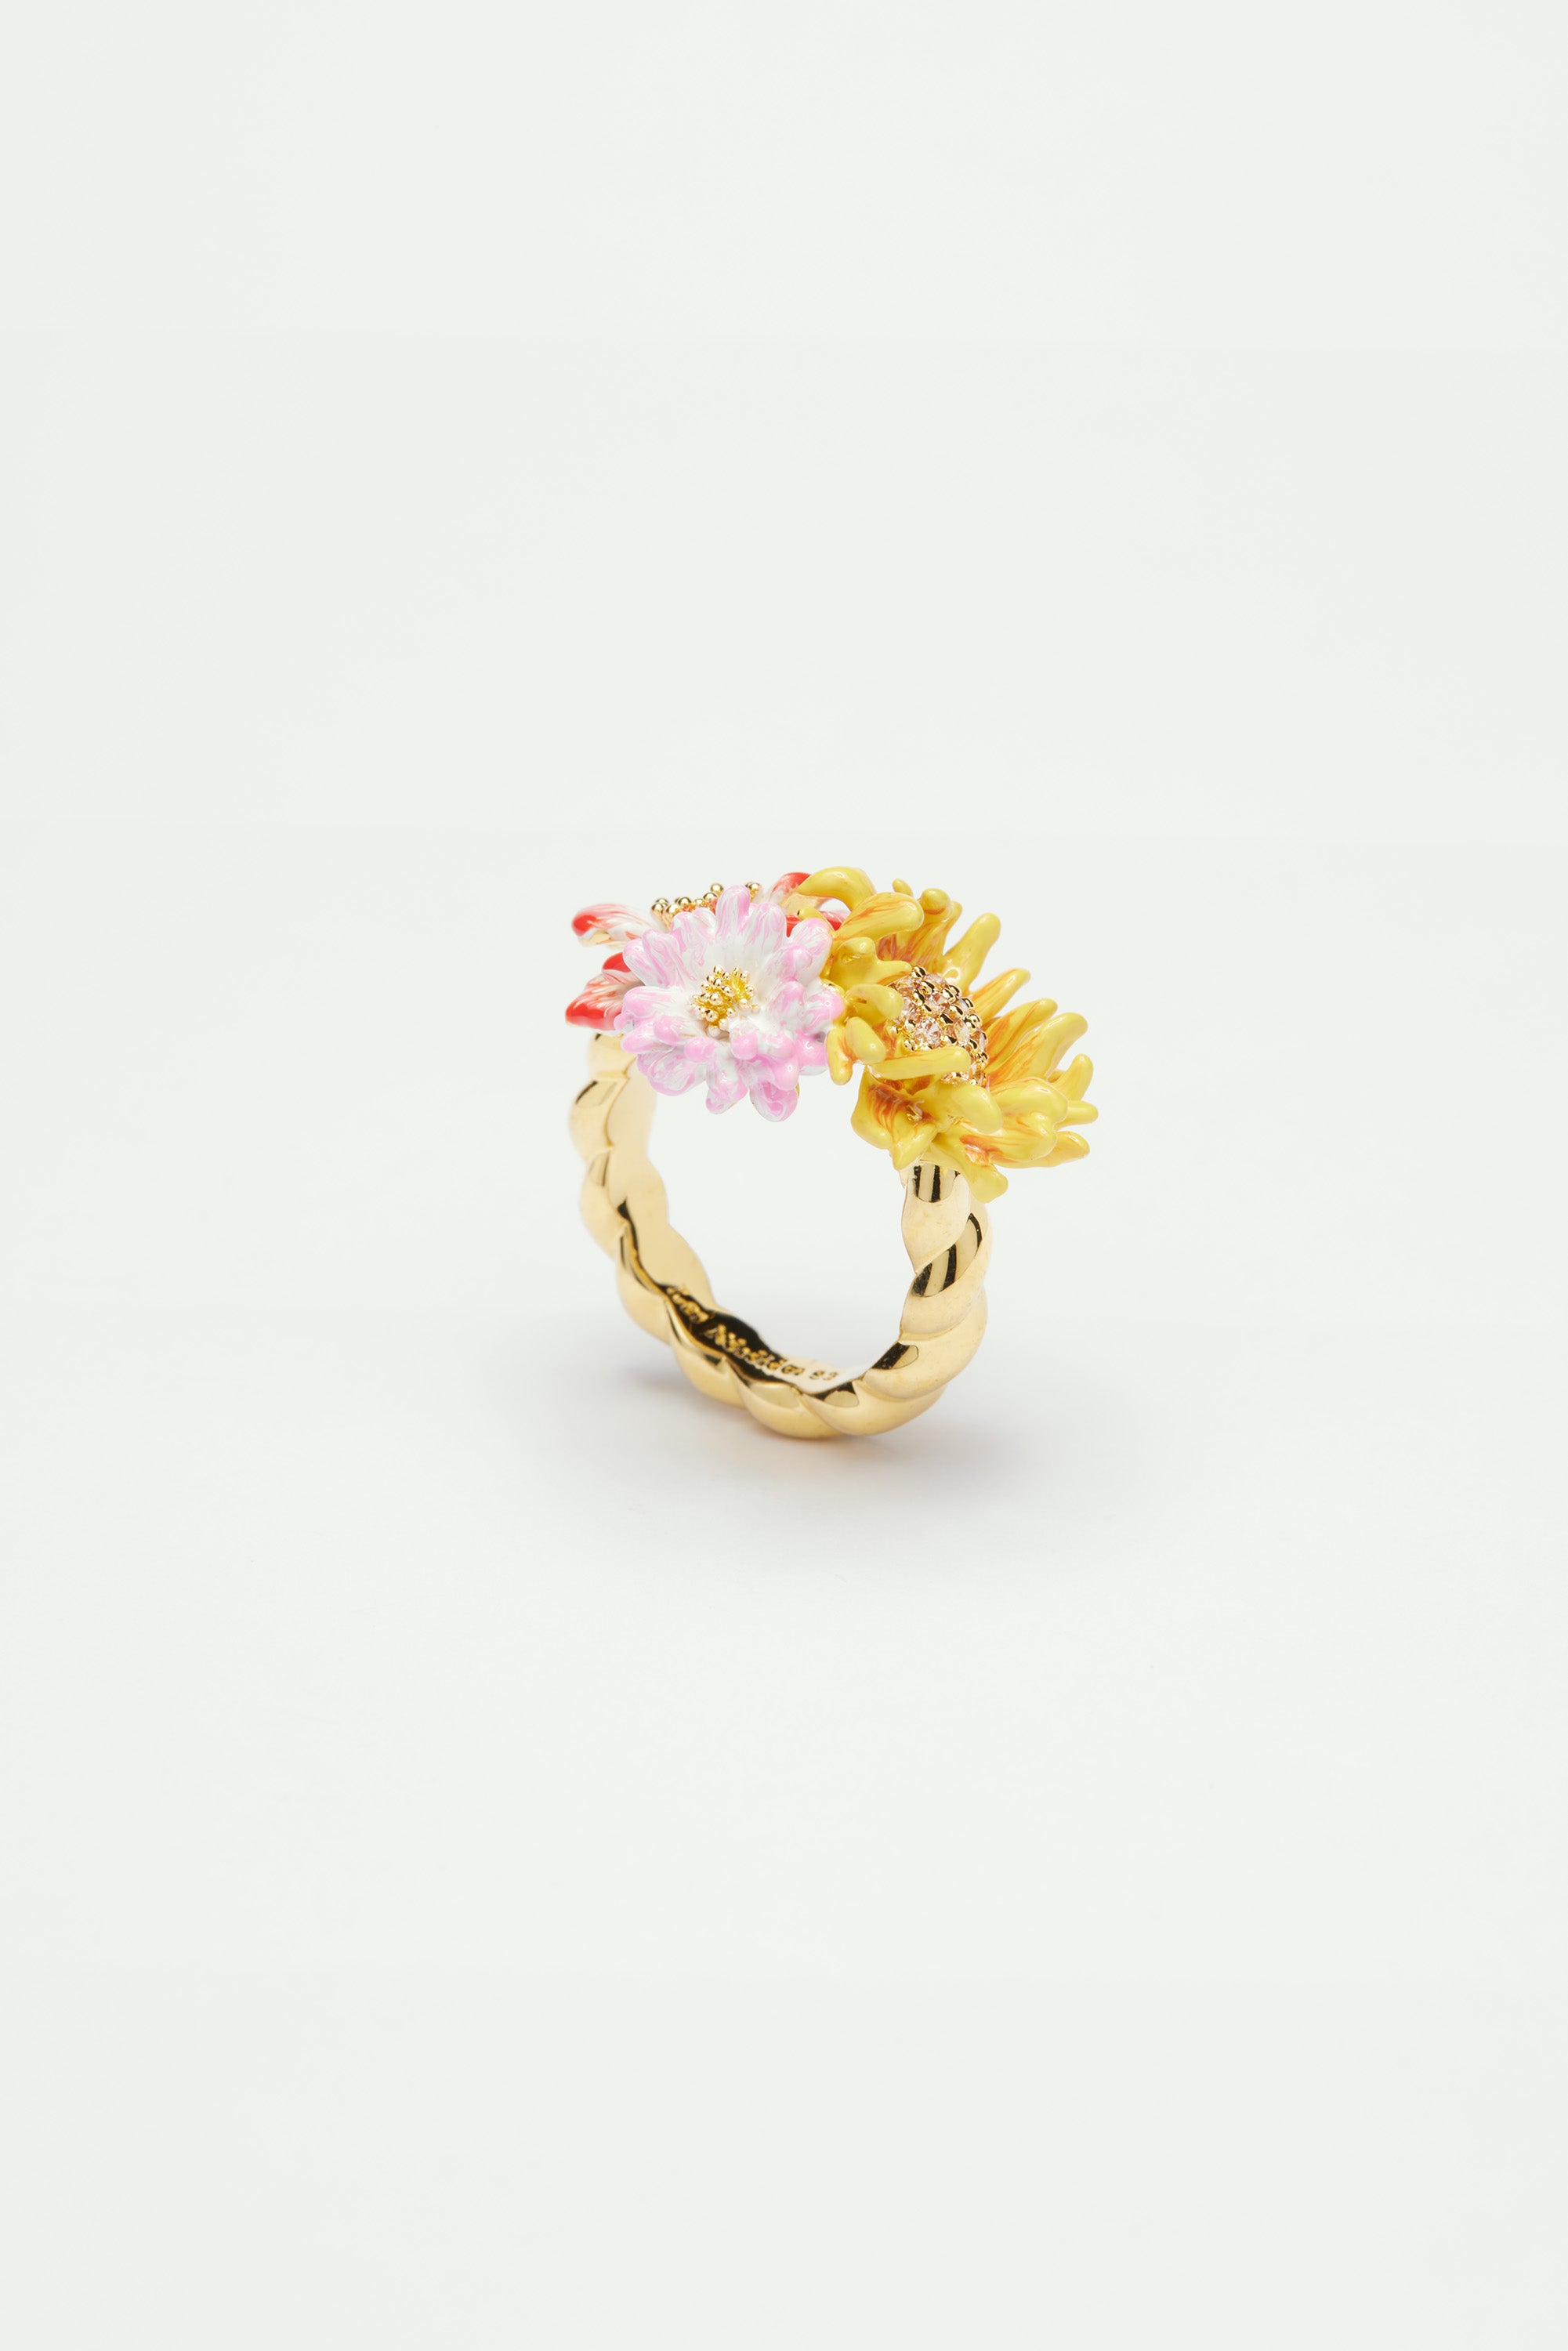 Wildflower cocktail ring